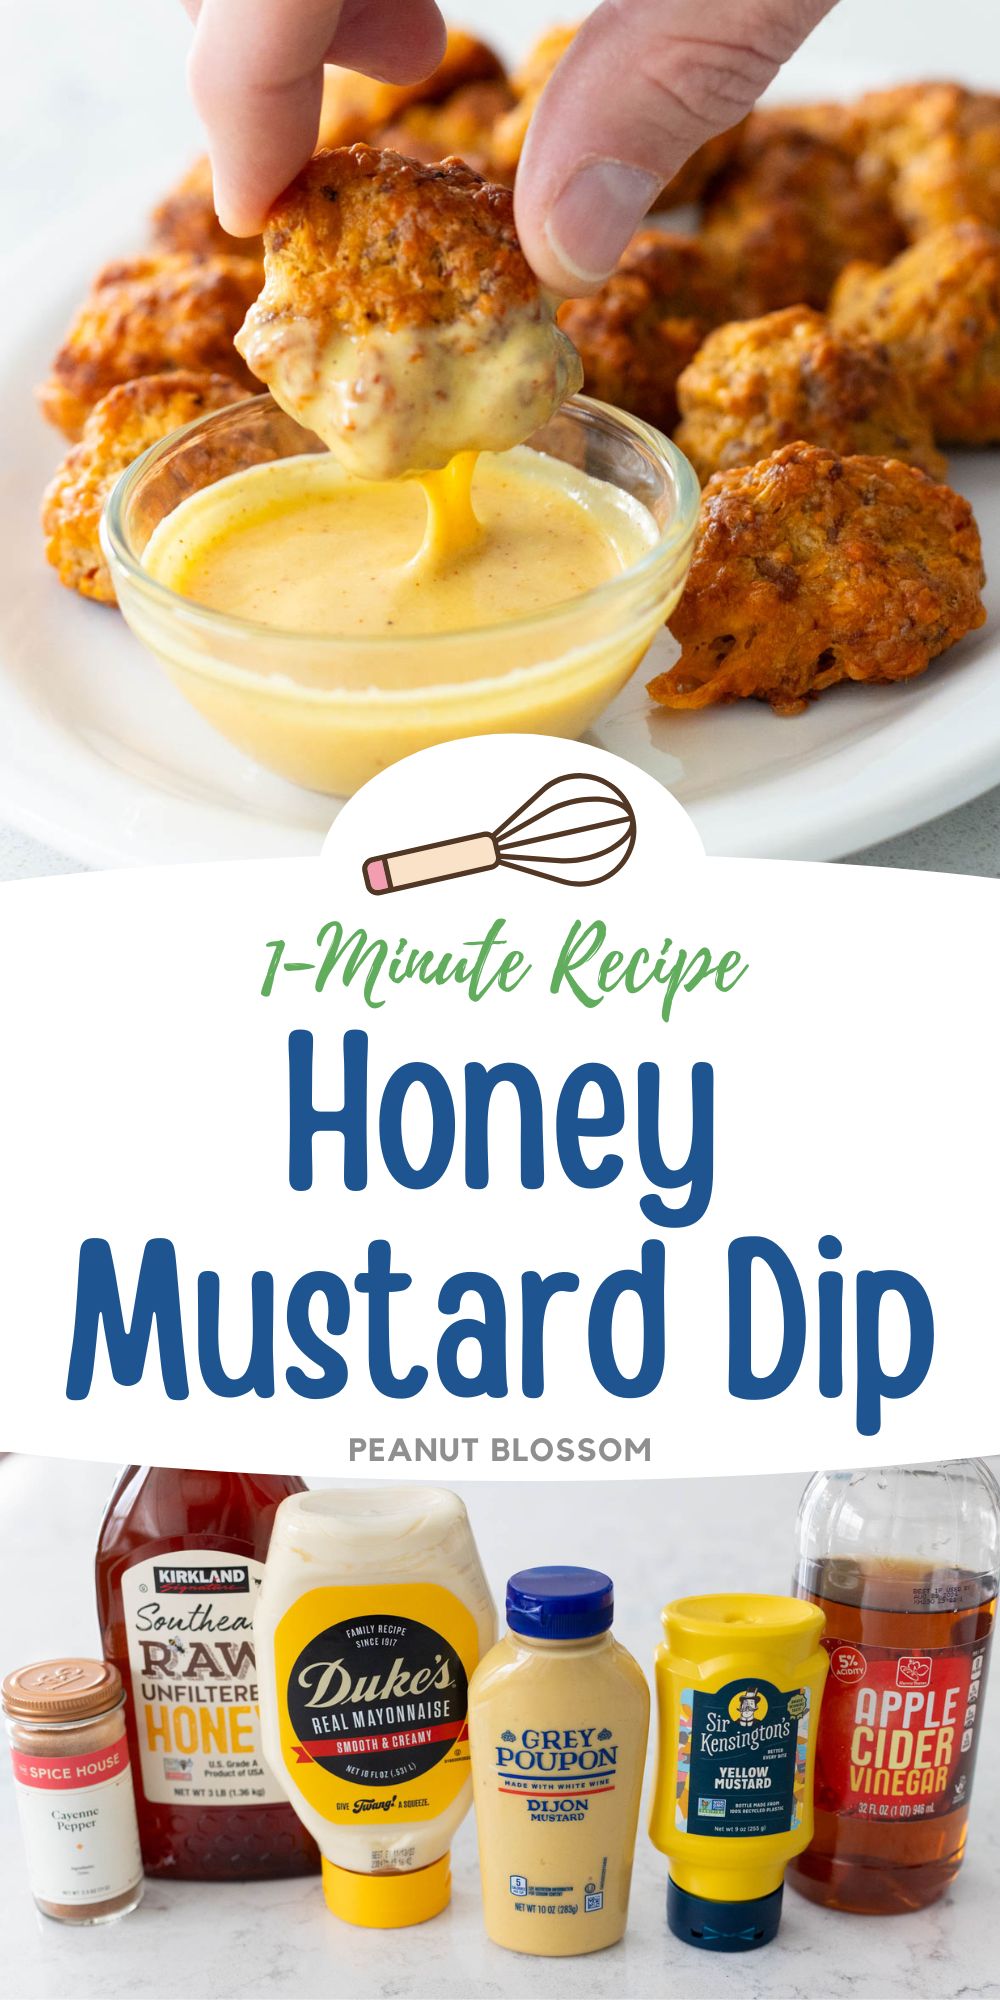 A photo collage shows a cup of honey mustard dip with fingers dunking a sausage ball into it next to a photo of the ingredients needed to make it.